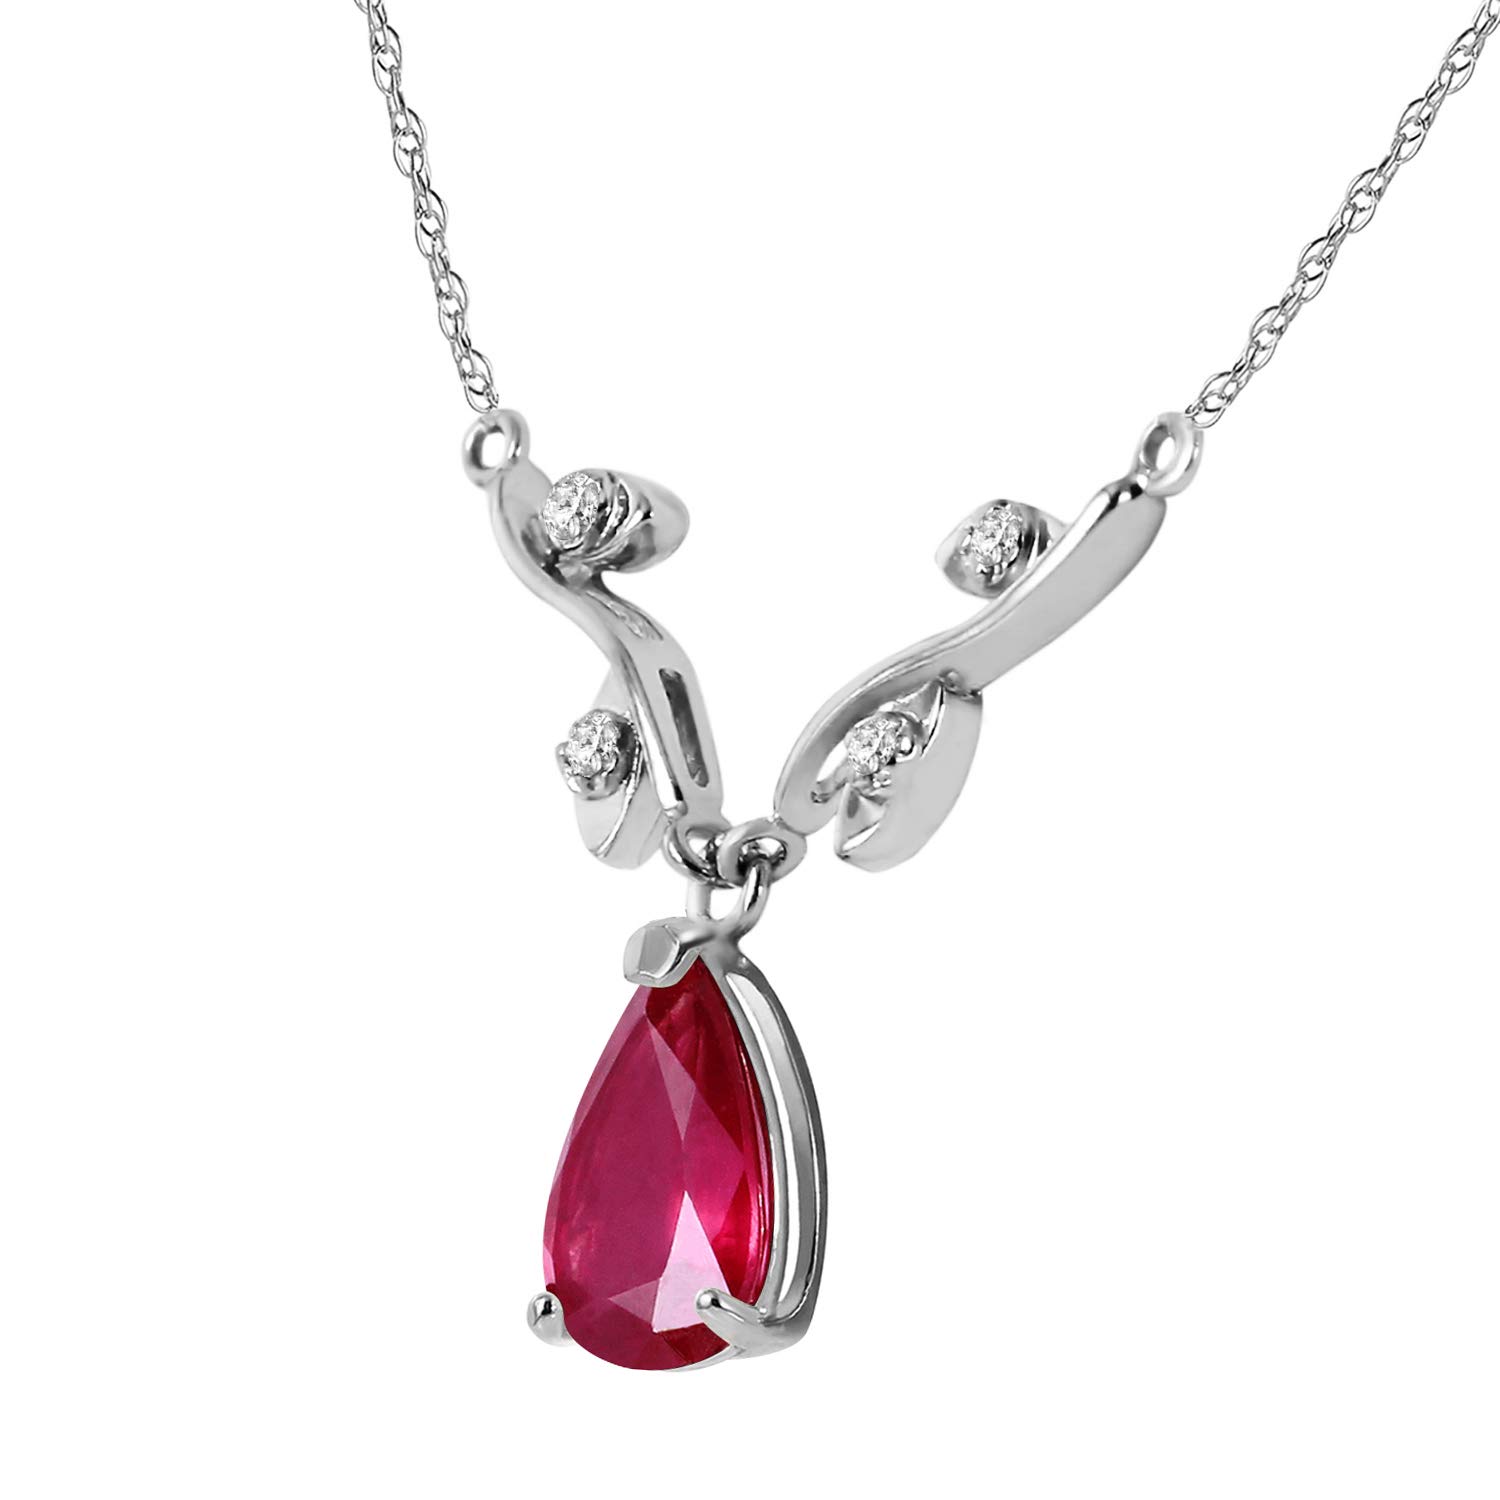 Galaxy Gold GG 14k Solid White Gold 1.52 ct Ruby Diamond Pendant Necklace